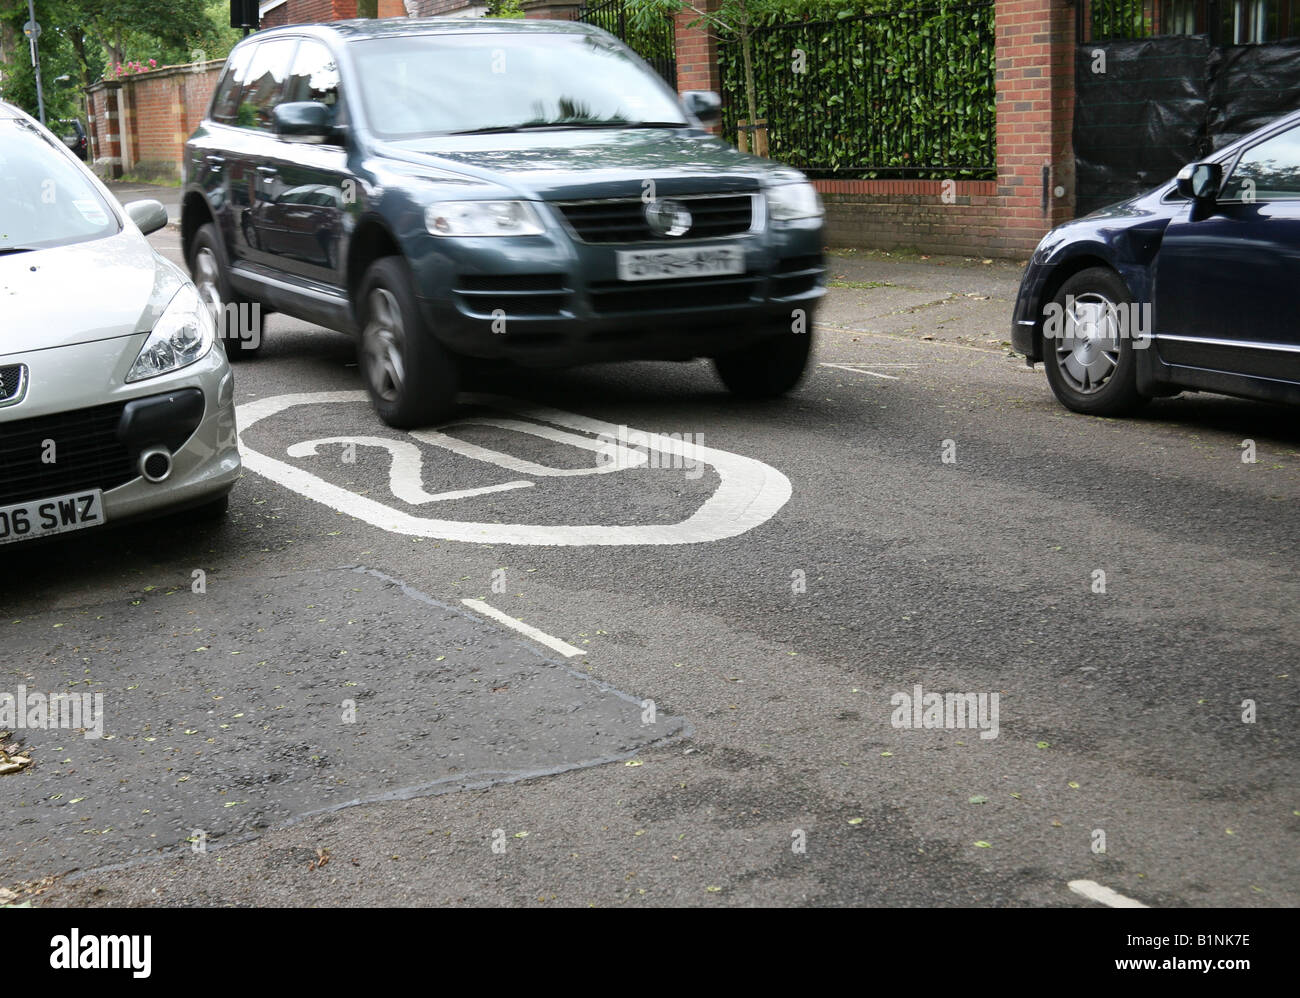 Car goes over 20mph speed limit marking in London street Stock Photo